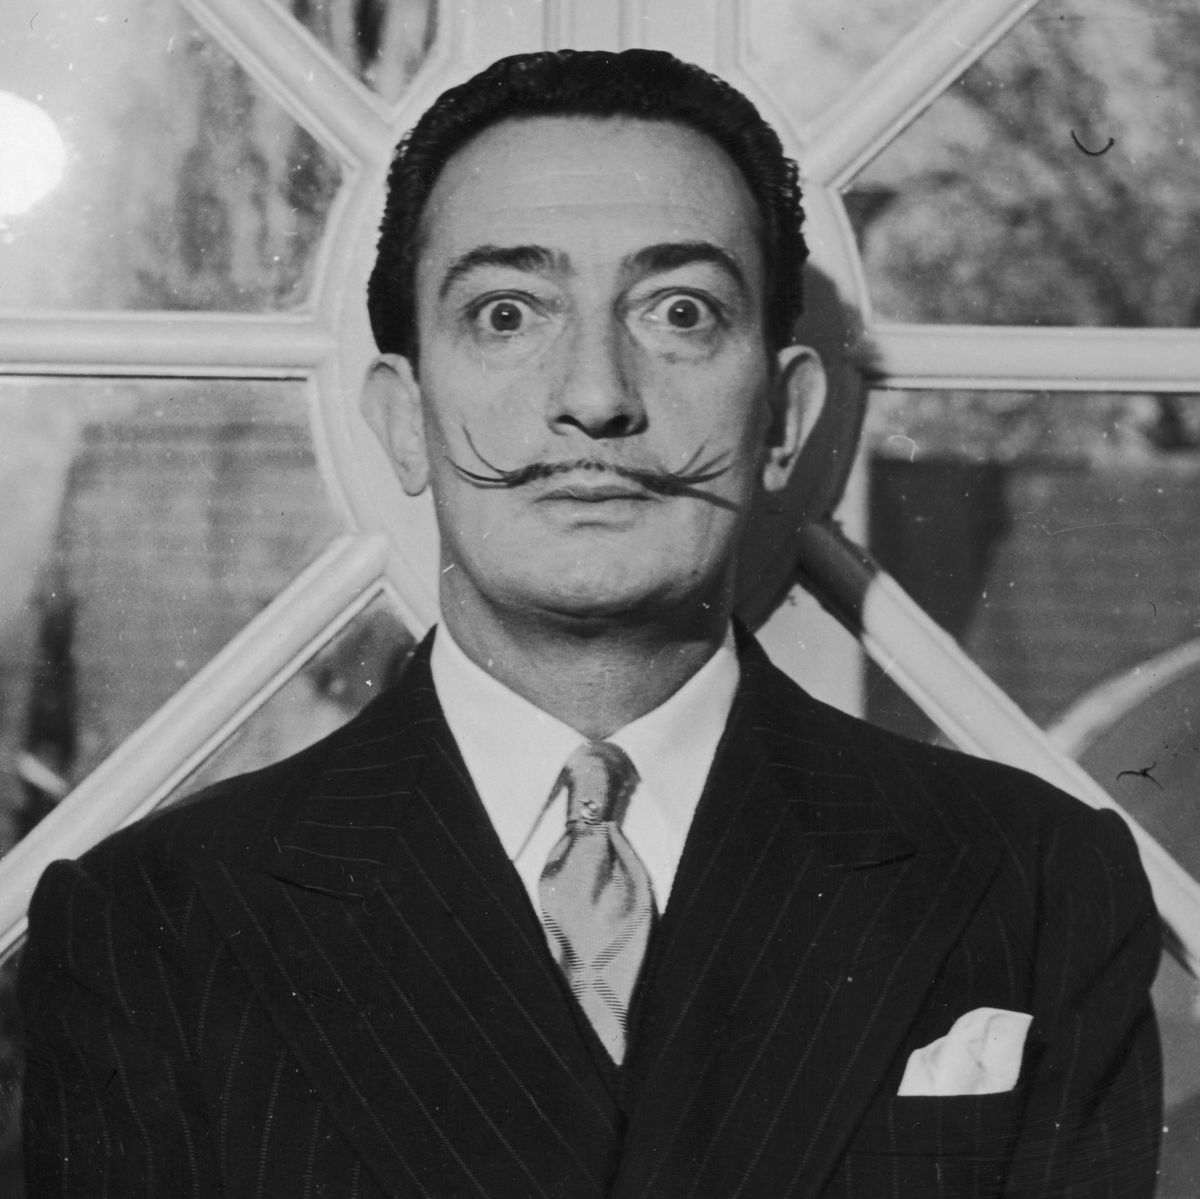 Salvador DaliPortrait of Spanish surrealist artist Salvador Dali (1904 - 1989). He is wearing a pinstriped suit and his trademark mustache. (Photo by Hulton Archive/Getty Images)